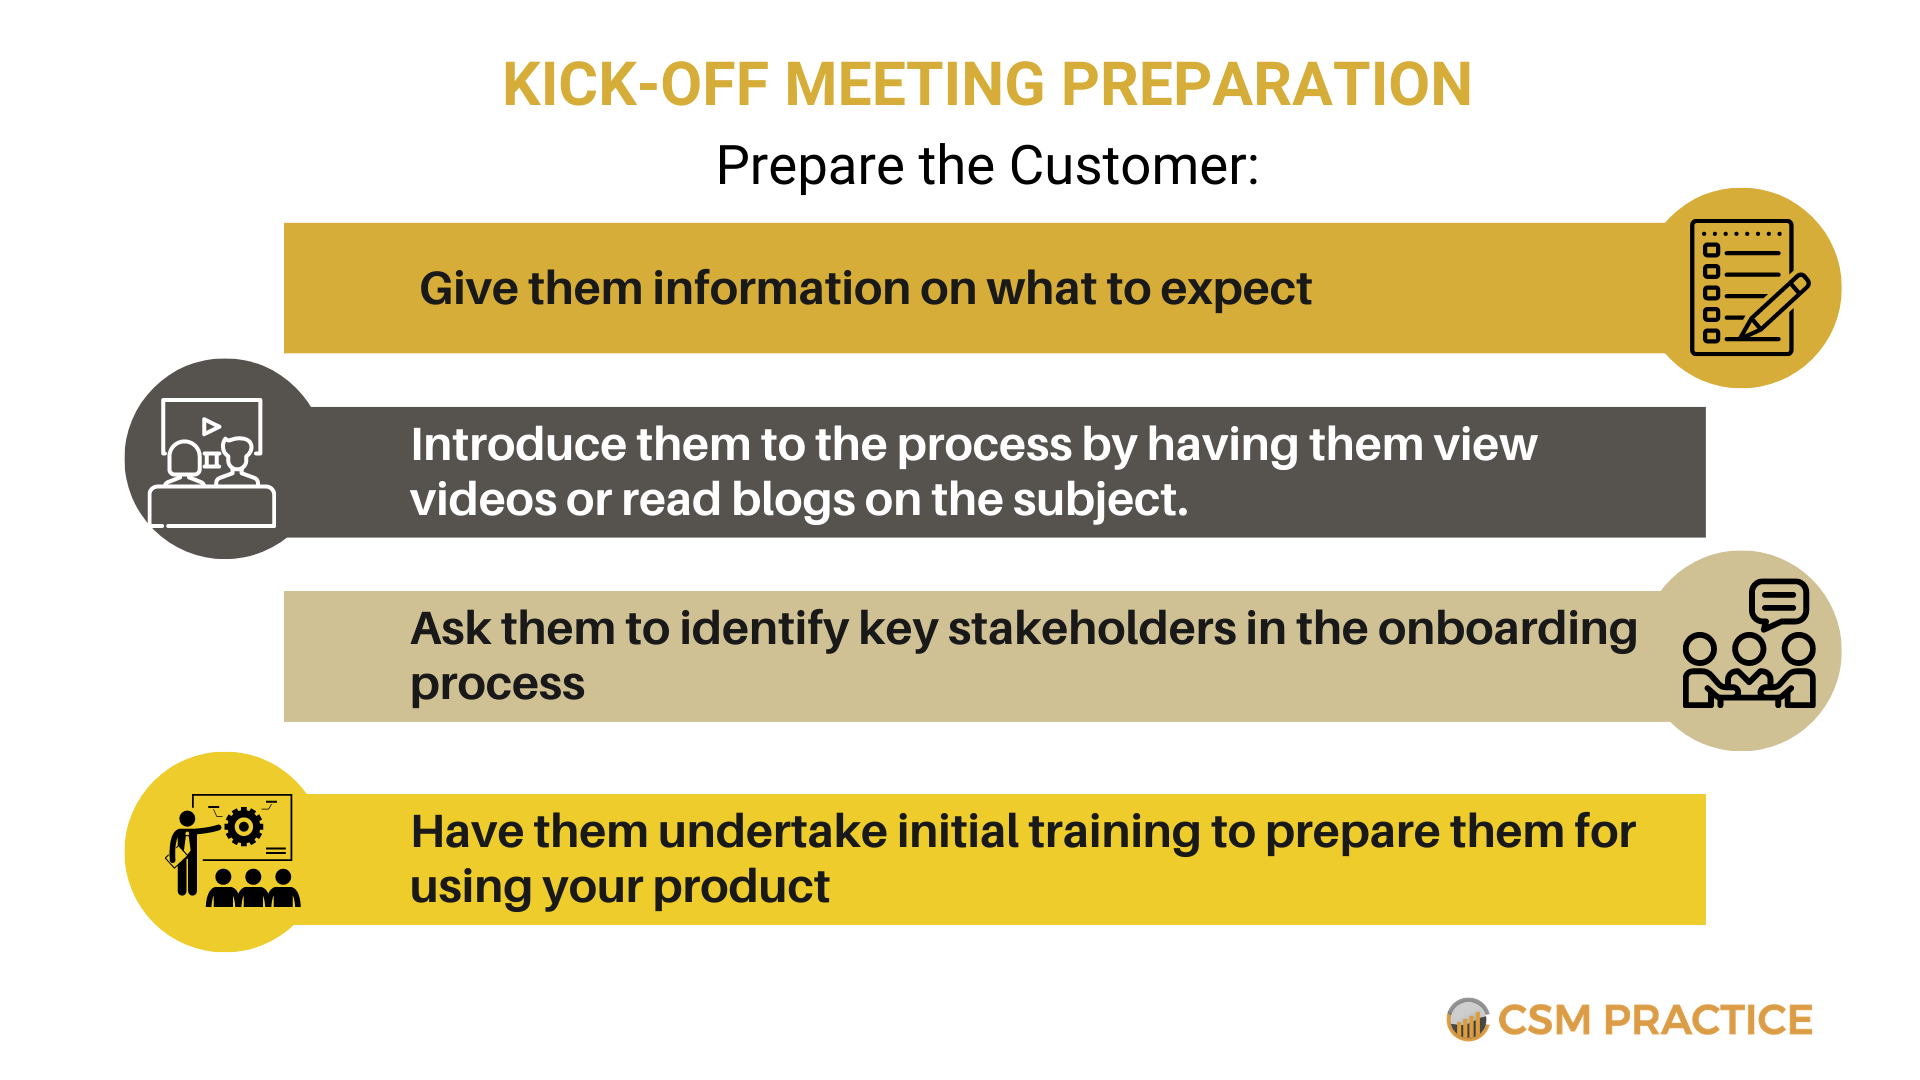 How To Set Your Kick Off Meetings Up For Success Laptrinhx News